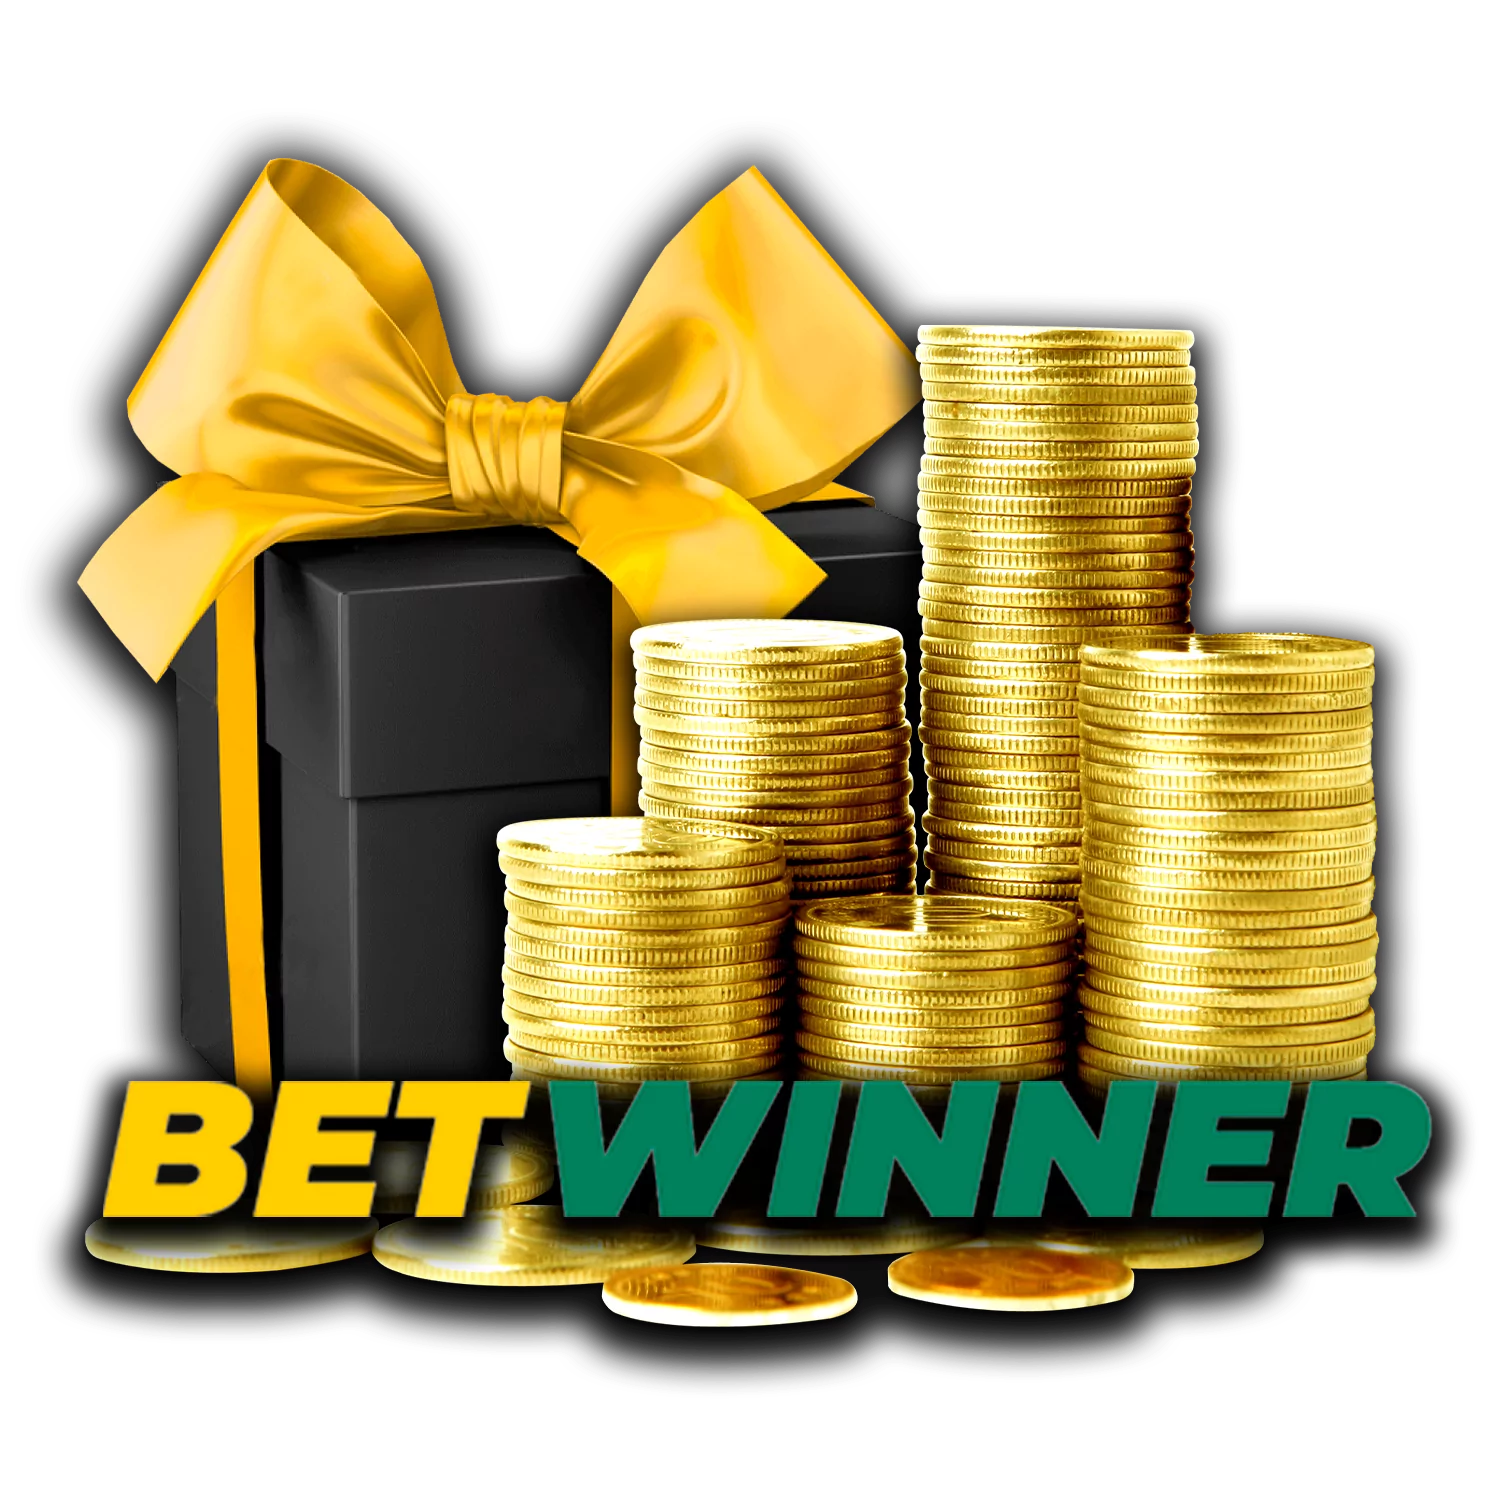 Learn how to get the welcome bonus for new users of Betwinner and win it back.